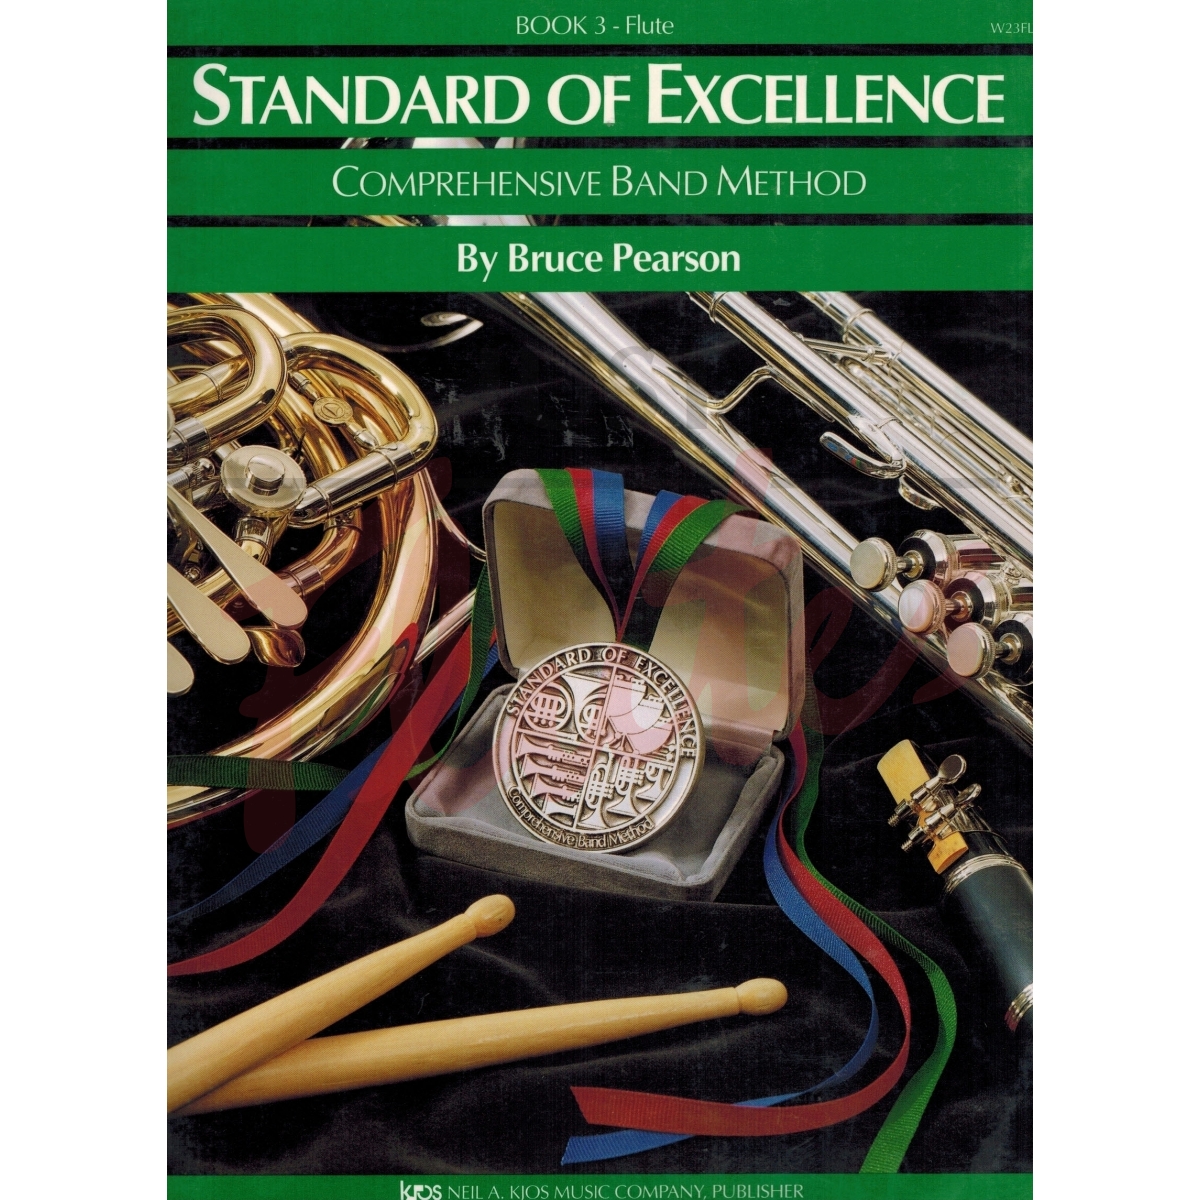 Standard of Excellence [Flute] Book 3